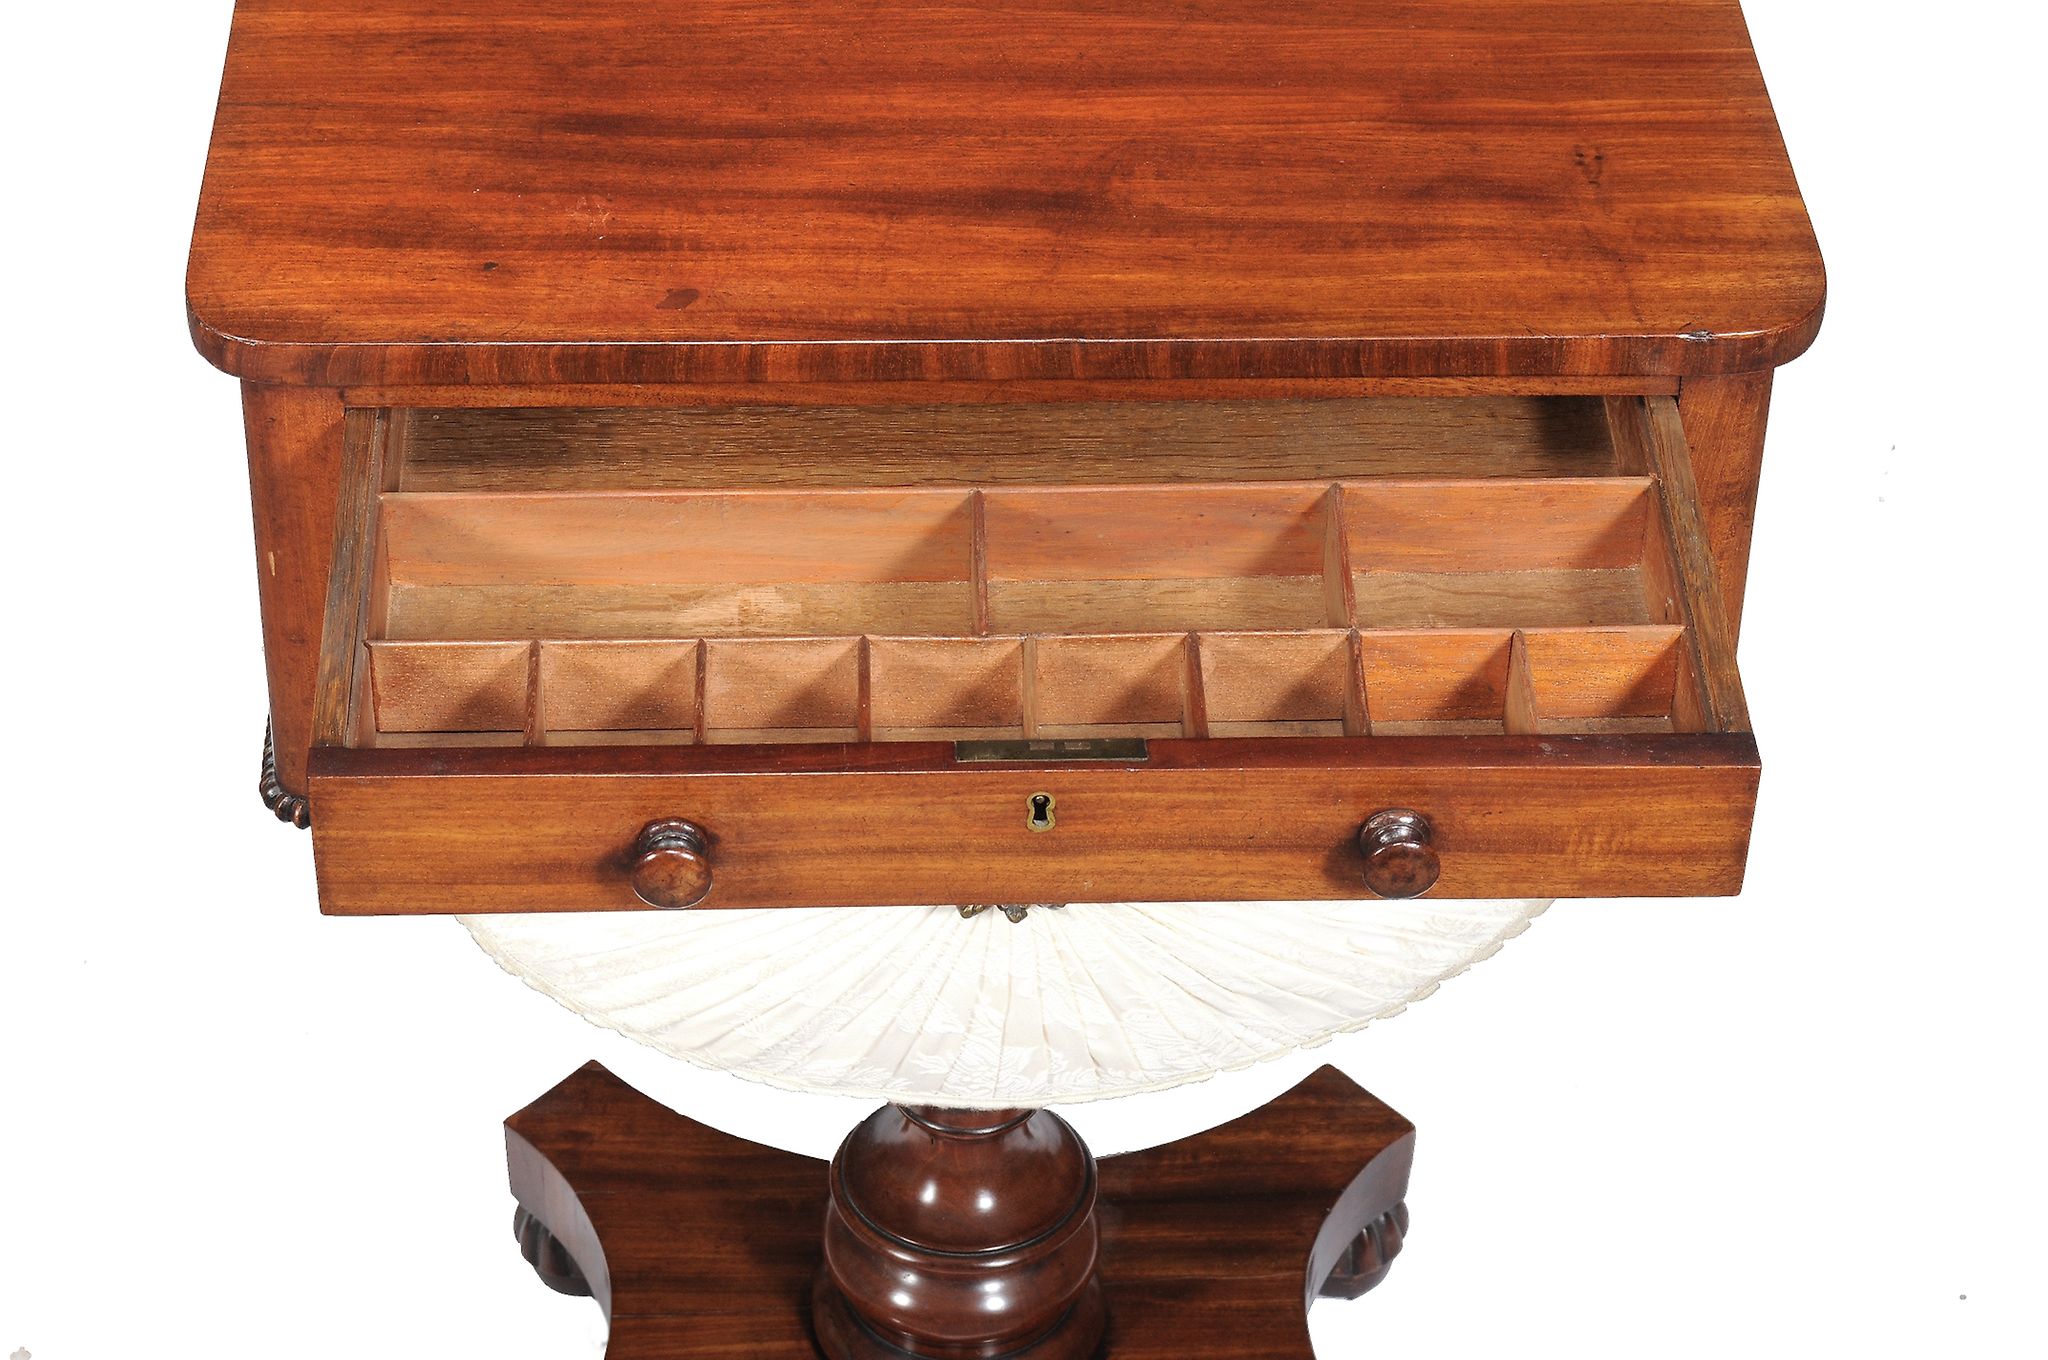 A William IV mahogany work table, circa 1835, the top drawer with a divided interior, 69cm high, - Image 3 of 3